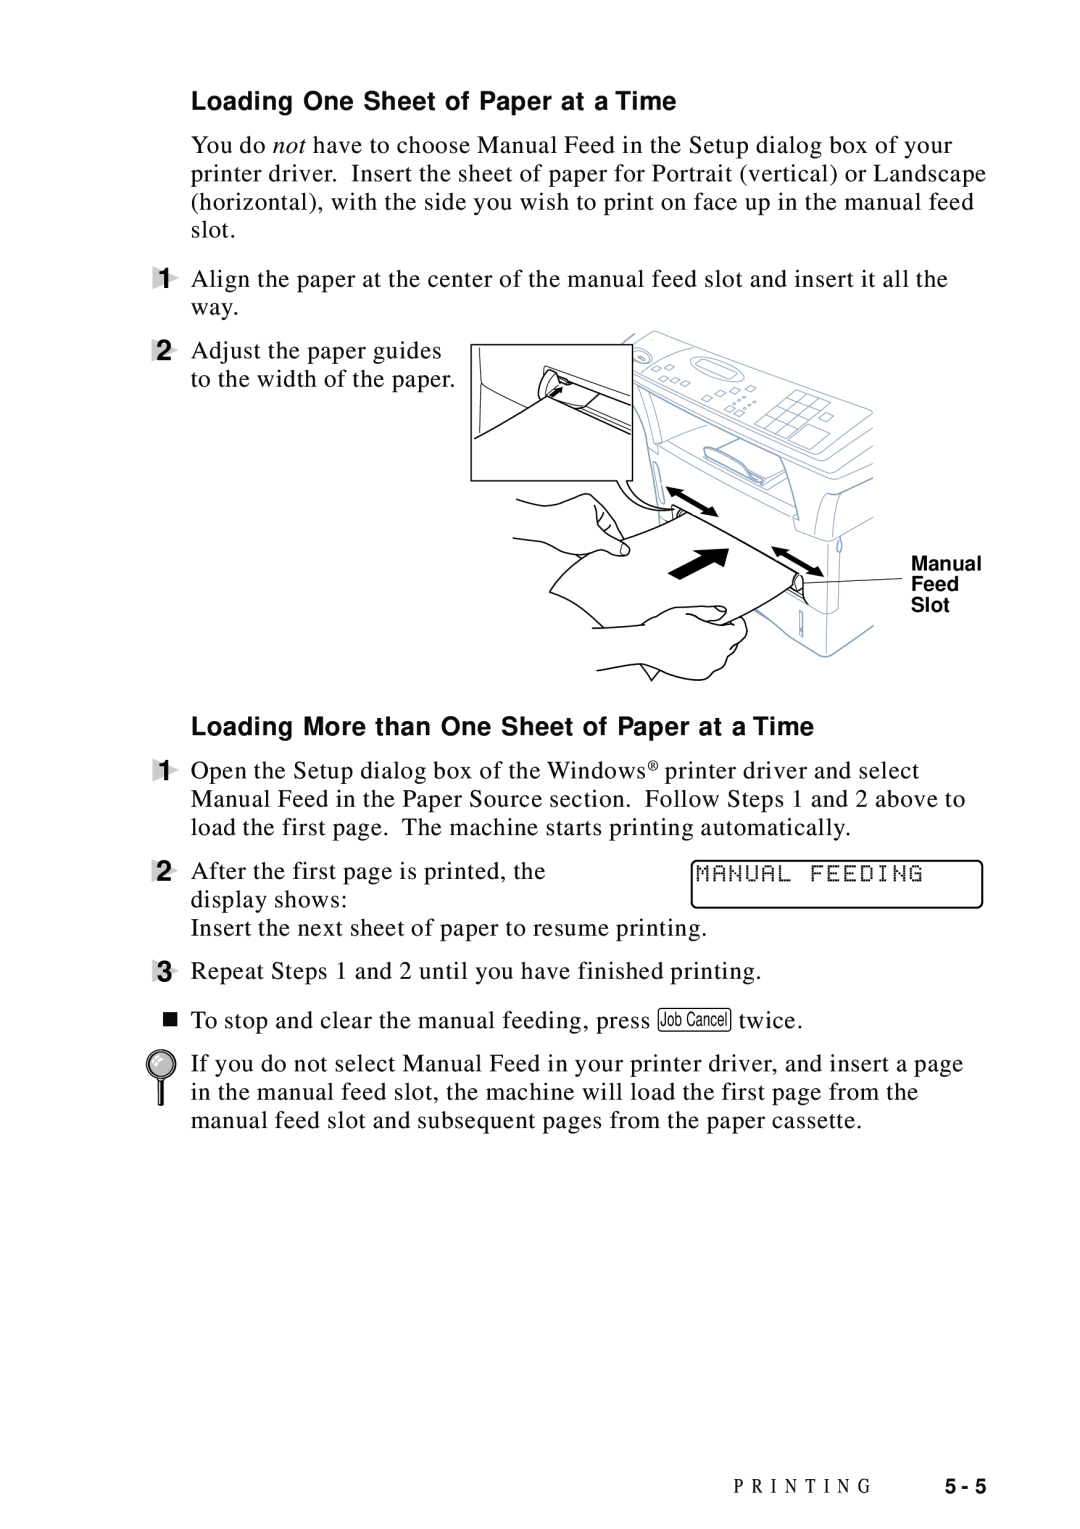 Brother DCP1200 manual Loading One Sheet of Paper at a Time, Loading More than One Sheet of Paper at a Time 